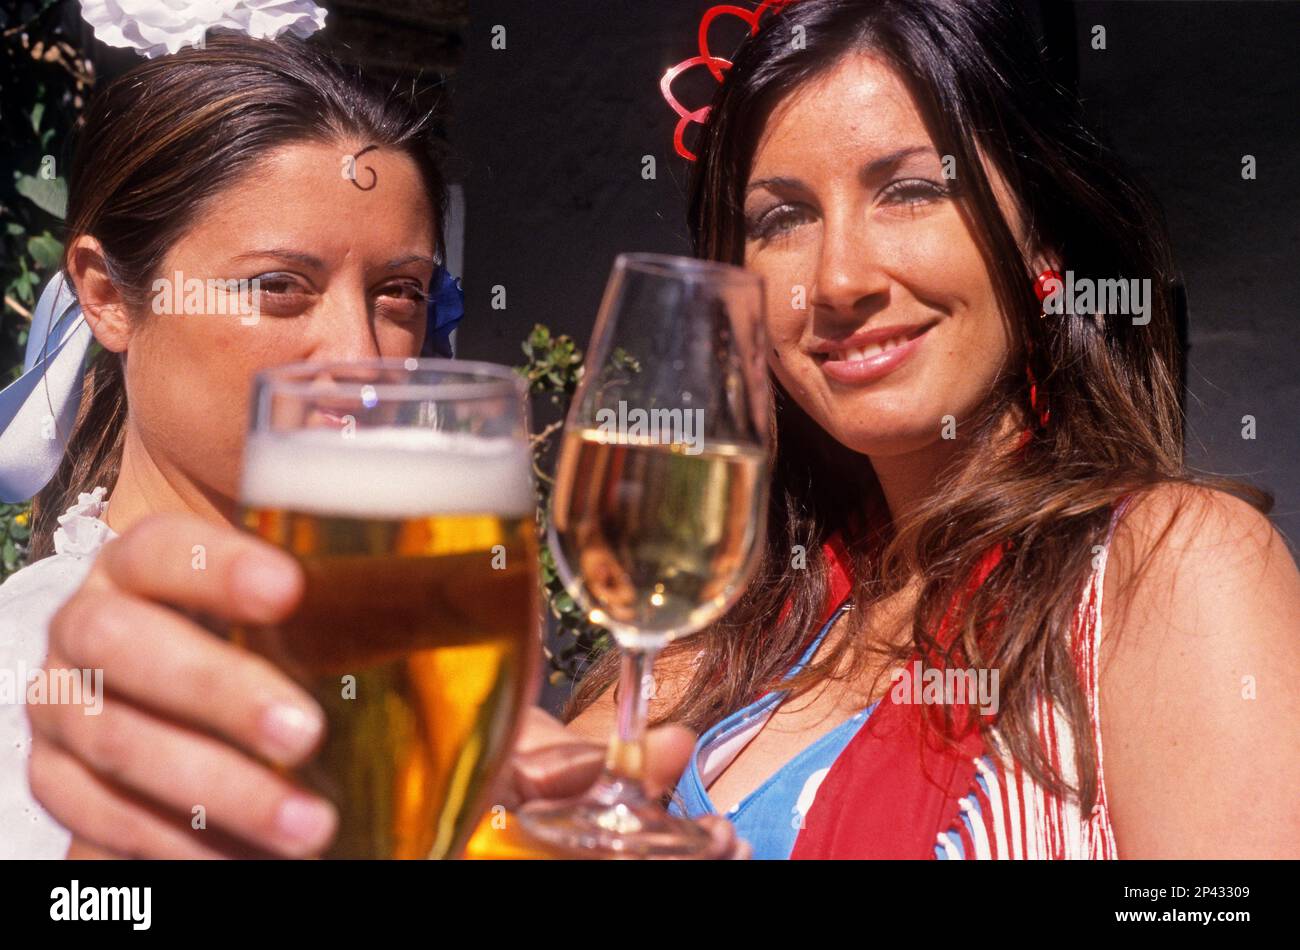 Córdoba.Andalusia. Spain: Portrait of women wearing traditional suit during the May Fair Stock Photo